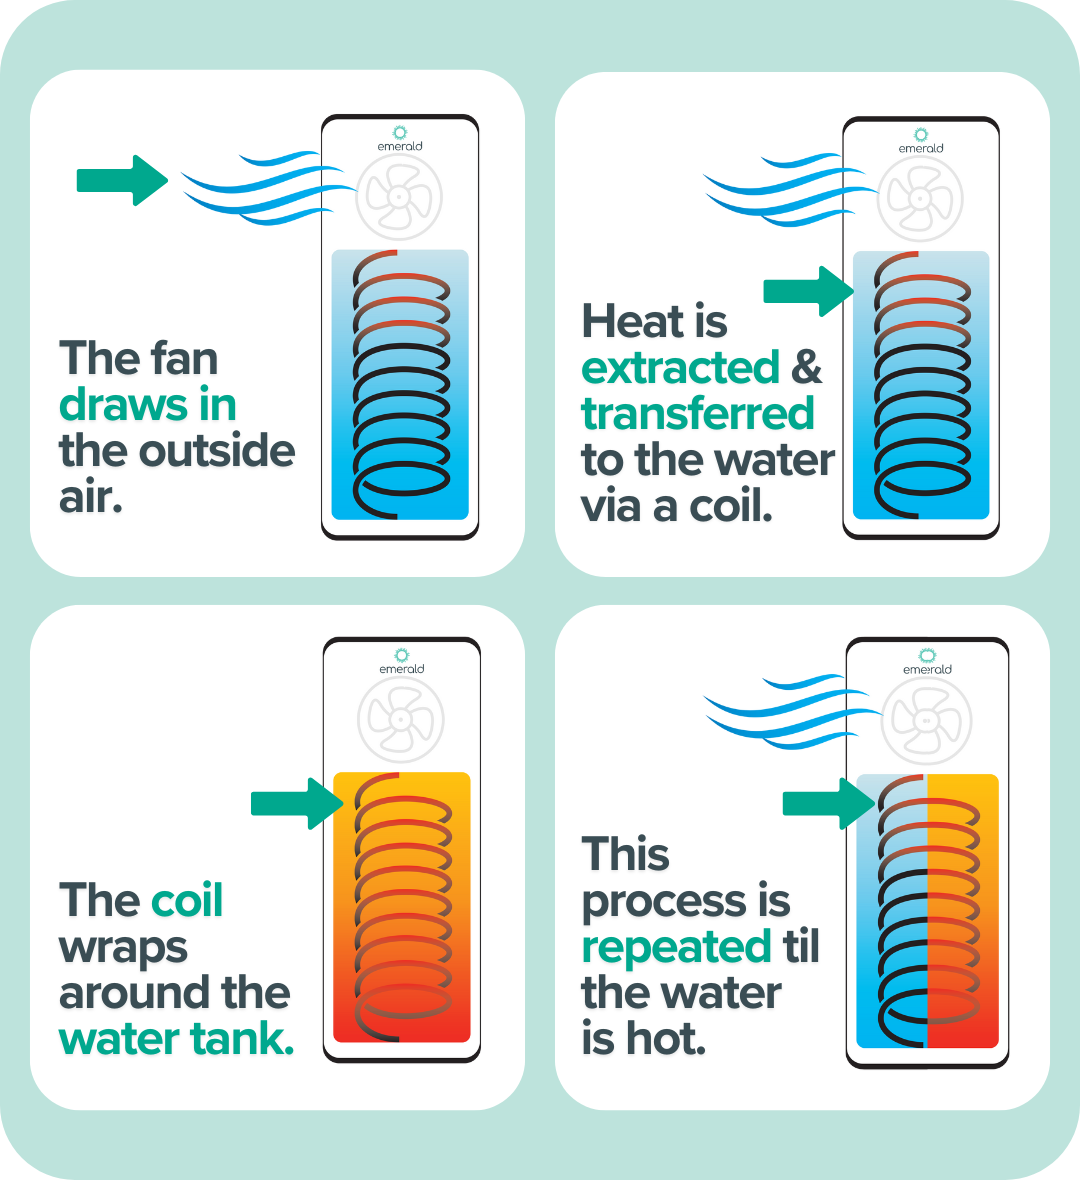 the fan draws in the outside air. heat is extracted and transferred to water via a coil. the coil wraps around the water tank. this process is repeated til the water is hot.